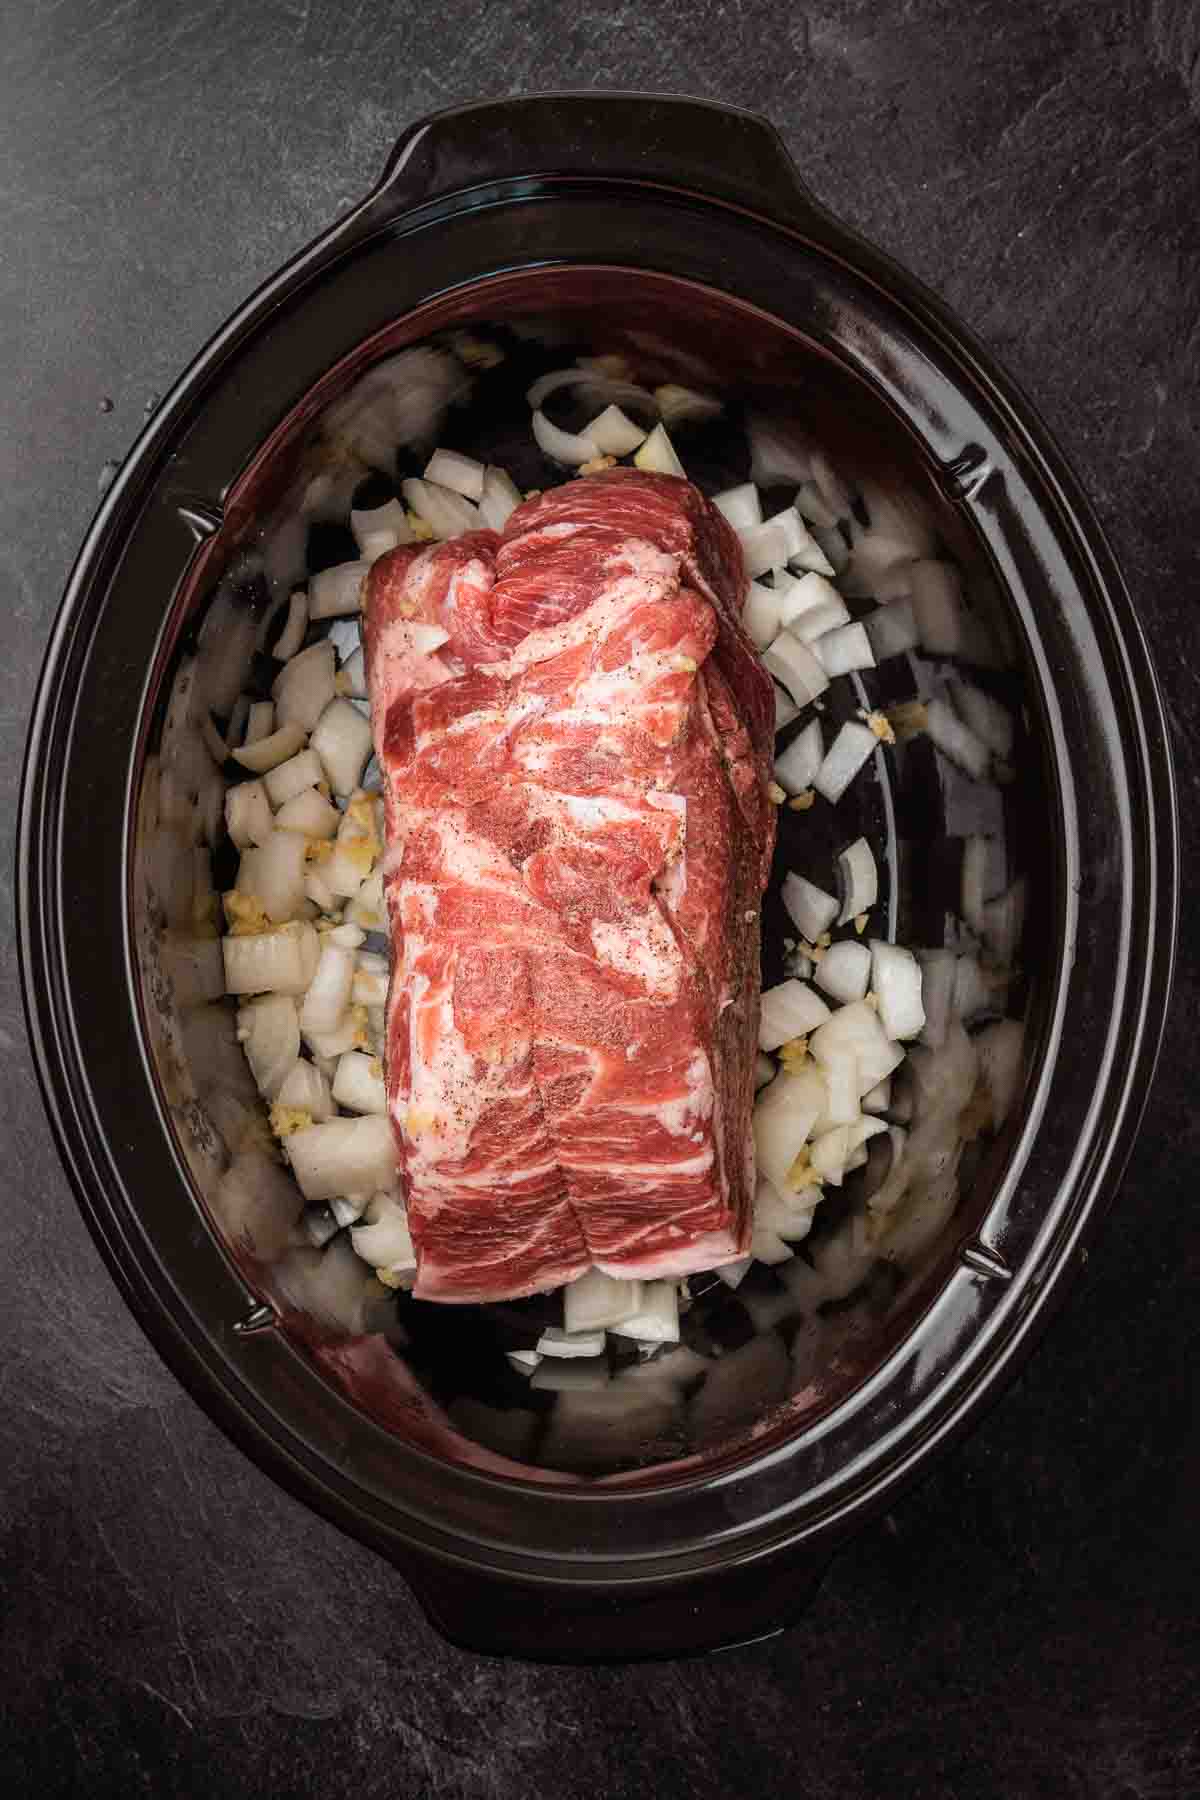 A piece of meat in a slow cooker with onions.